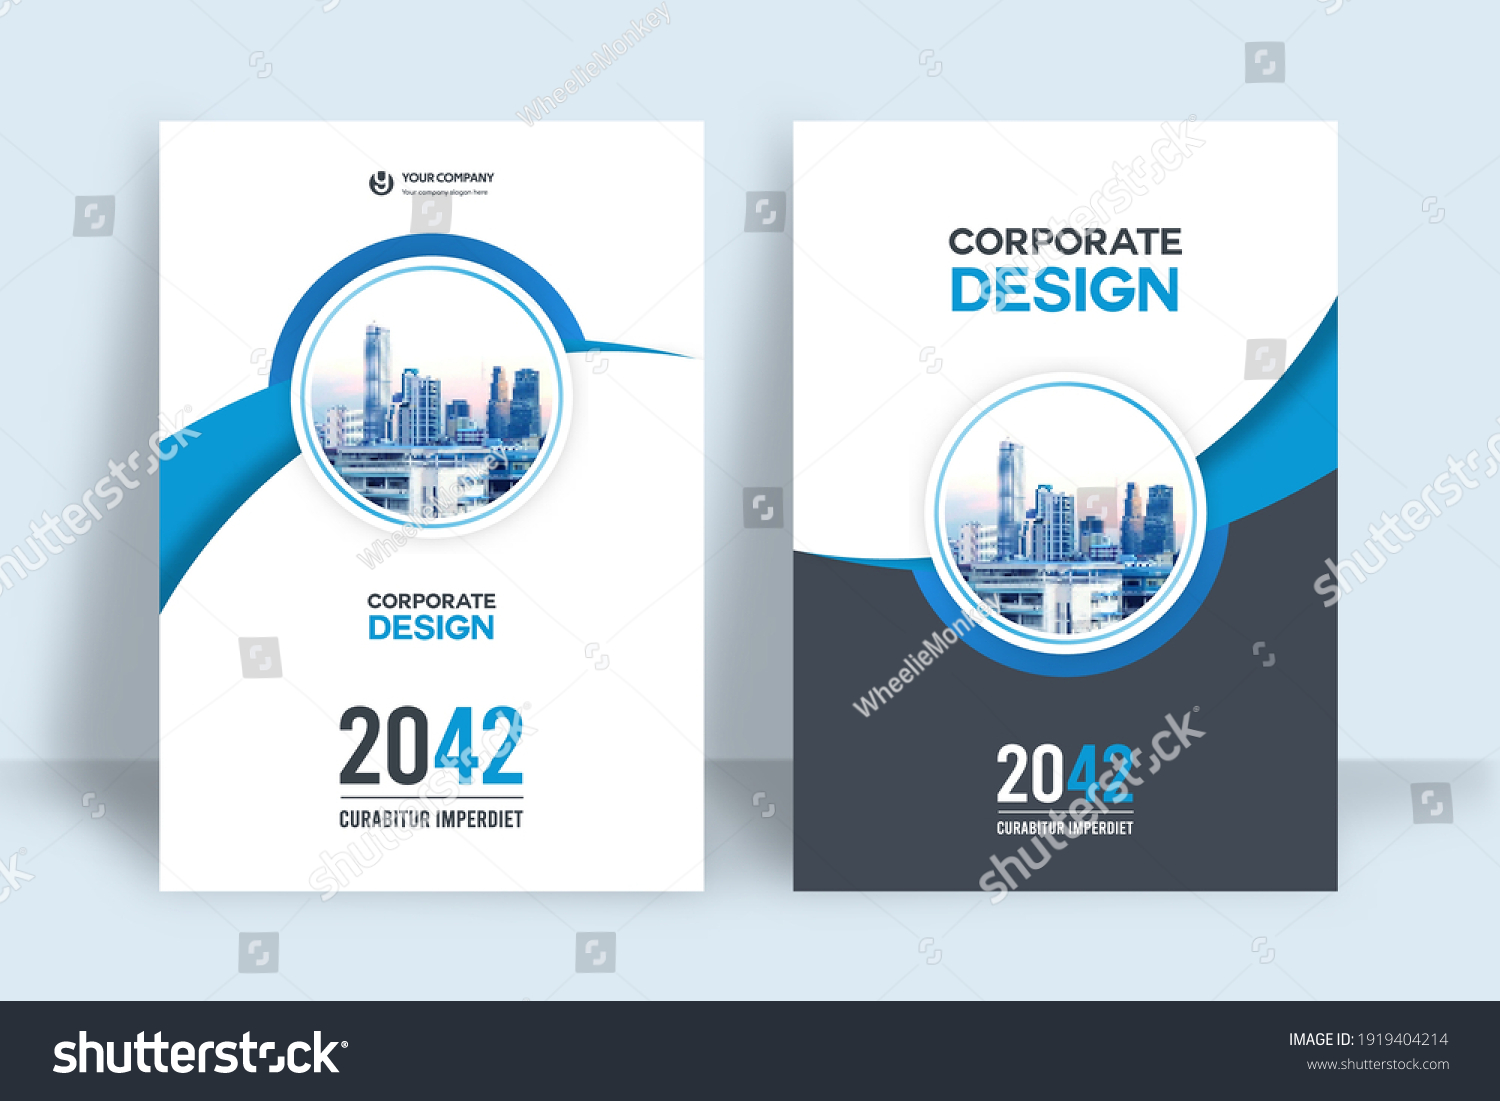 Corporate Book Cover Design Template in A4. Can be adapt to Brochure, Annual Report, Magazine,Poster, Business Presentation, Portfolio, Flyer, Banner, Website. #1919404214